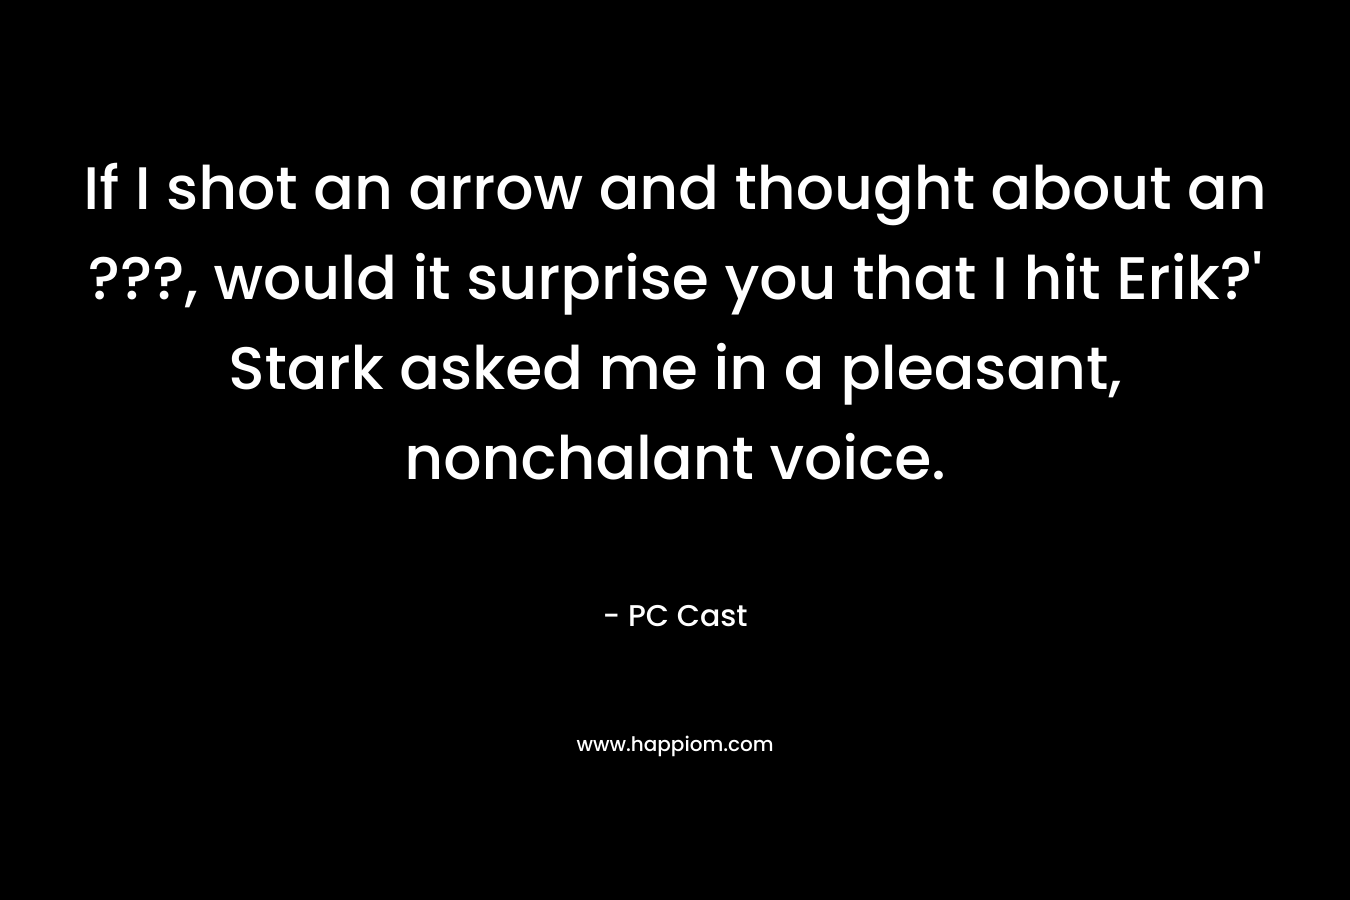 If I shot an arrow and thought about an ???, would it surprise you that I hit Erik?’ Stark asked me in a pleasant, nonchalant voice. – PC Cast